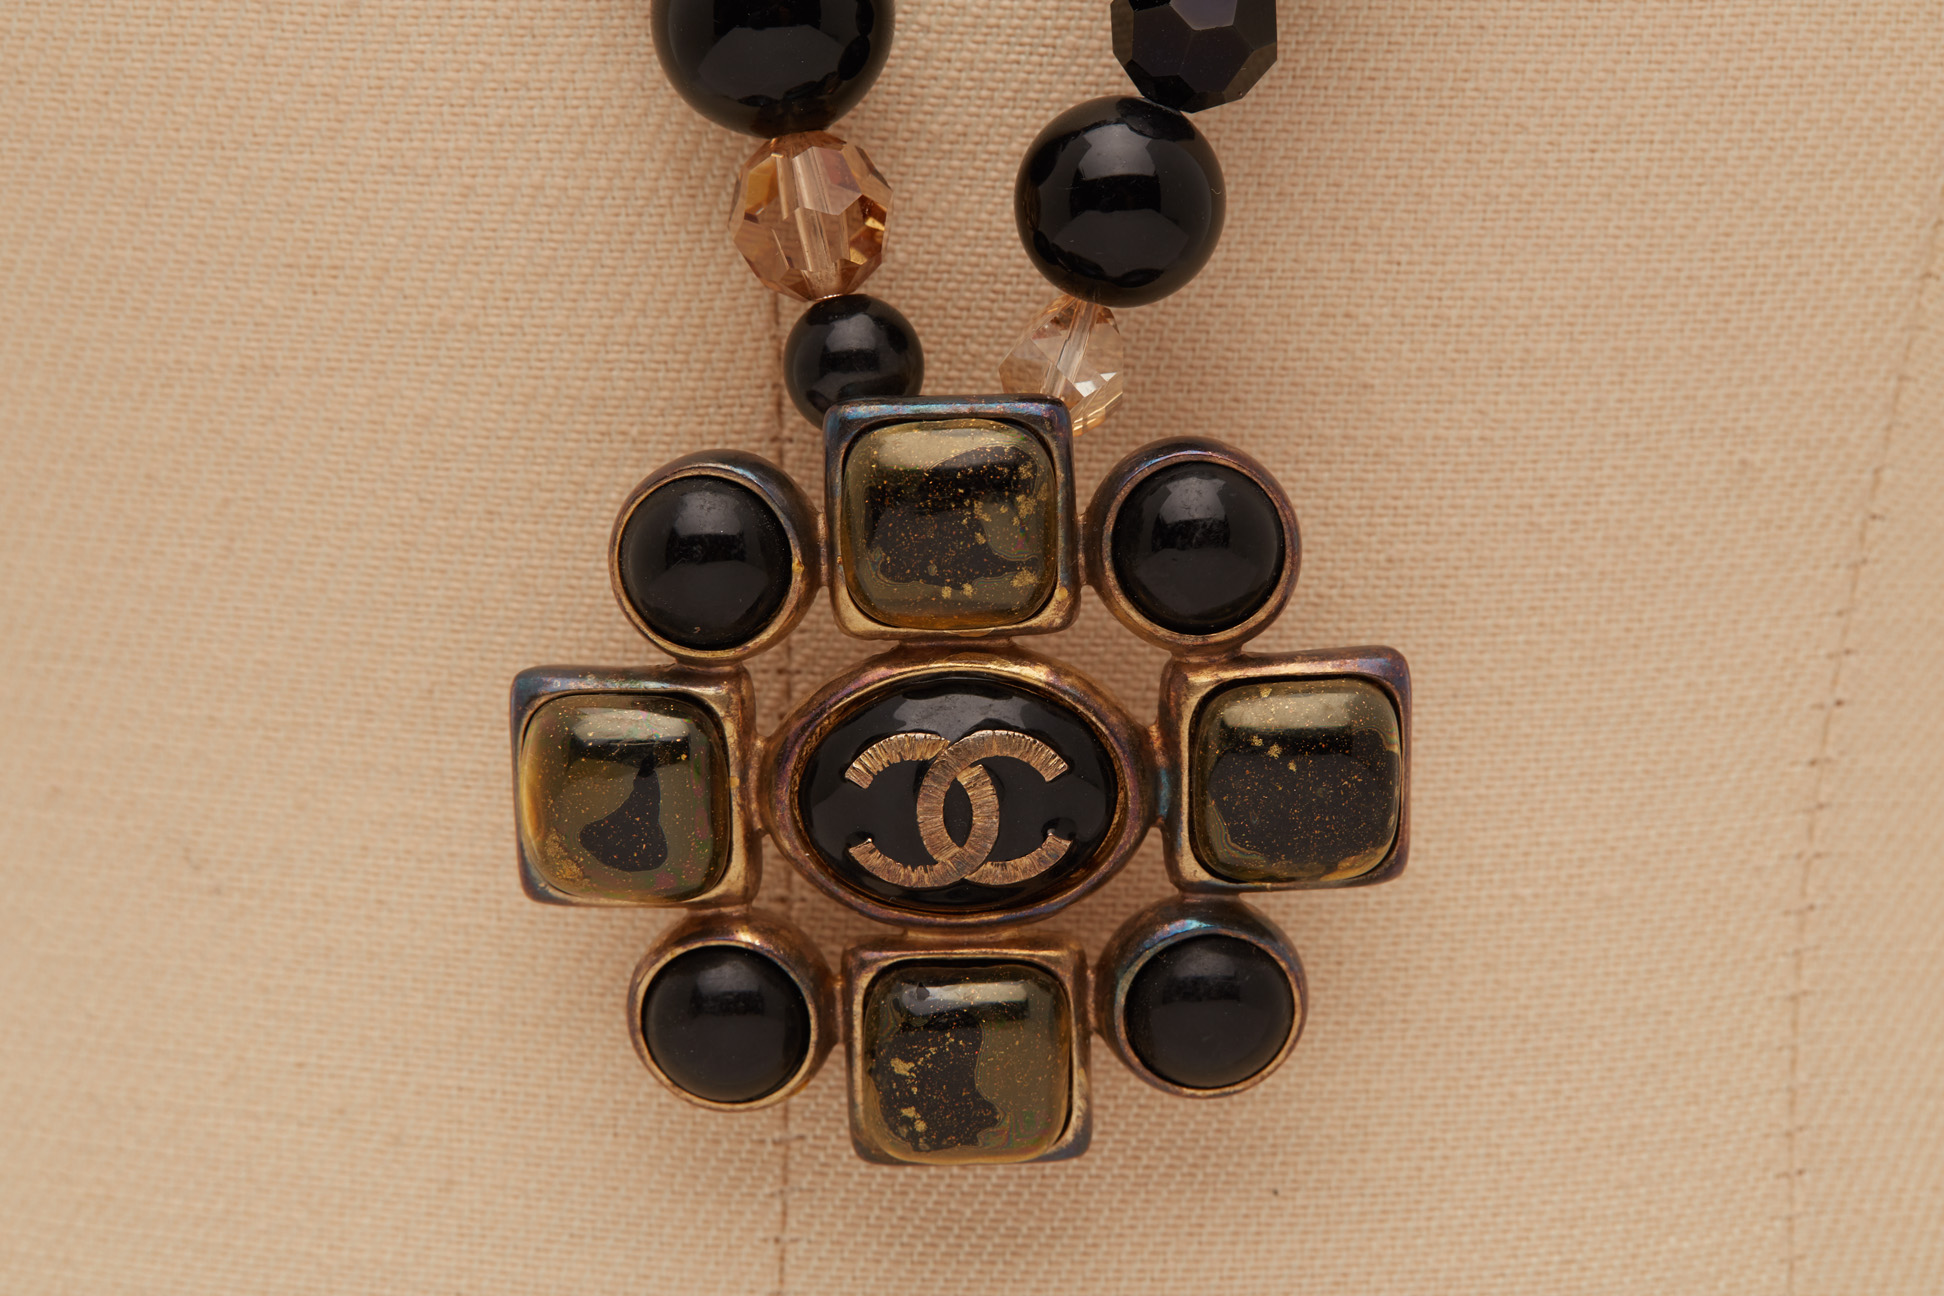 A CHANEL BLACK BEAD NECKLACE - Image 2 of 3